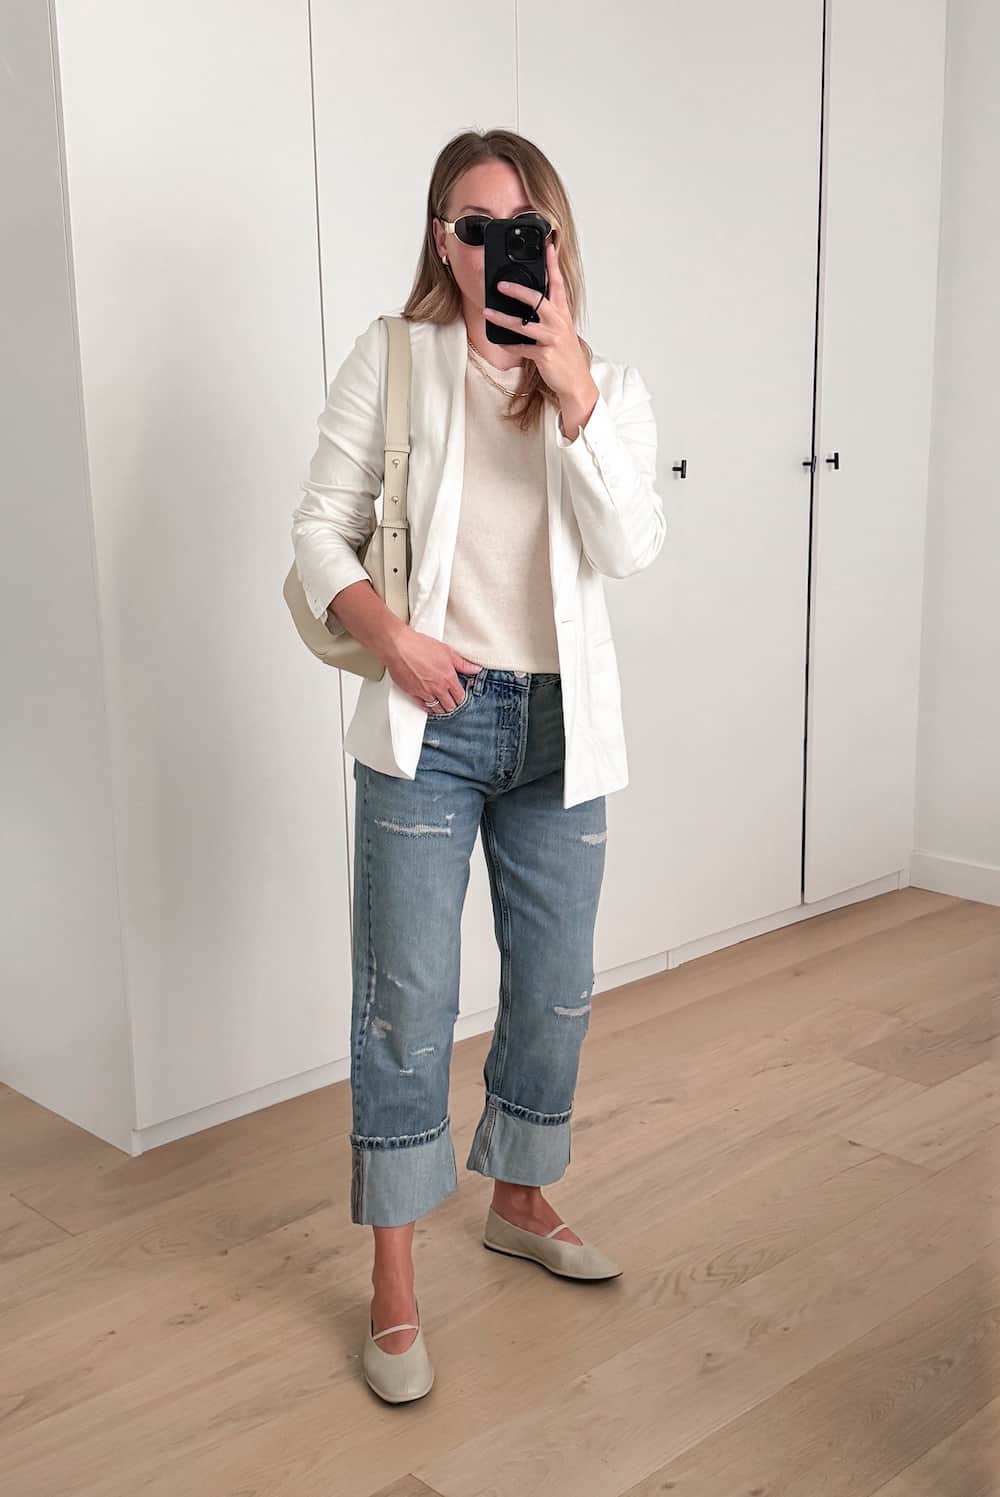 Christal wearing jeans, ballet flats, a white knot top and a white blazer.